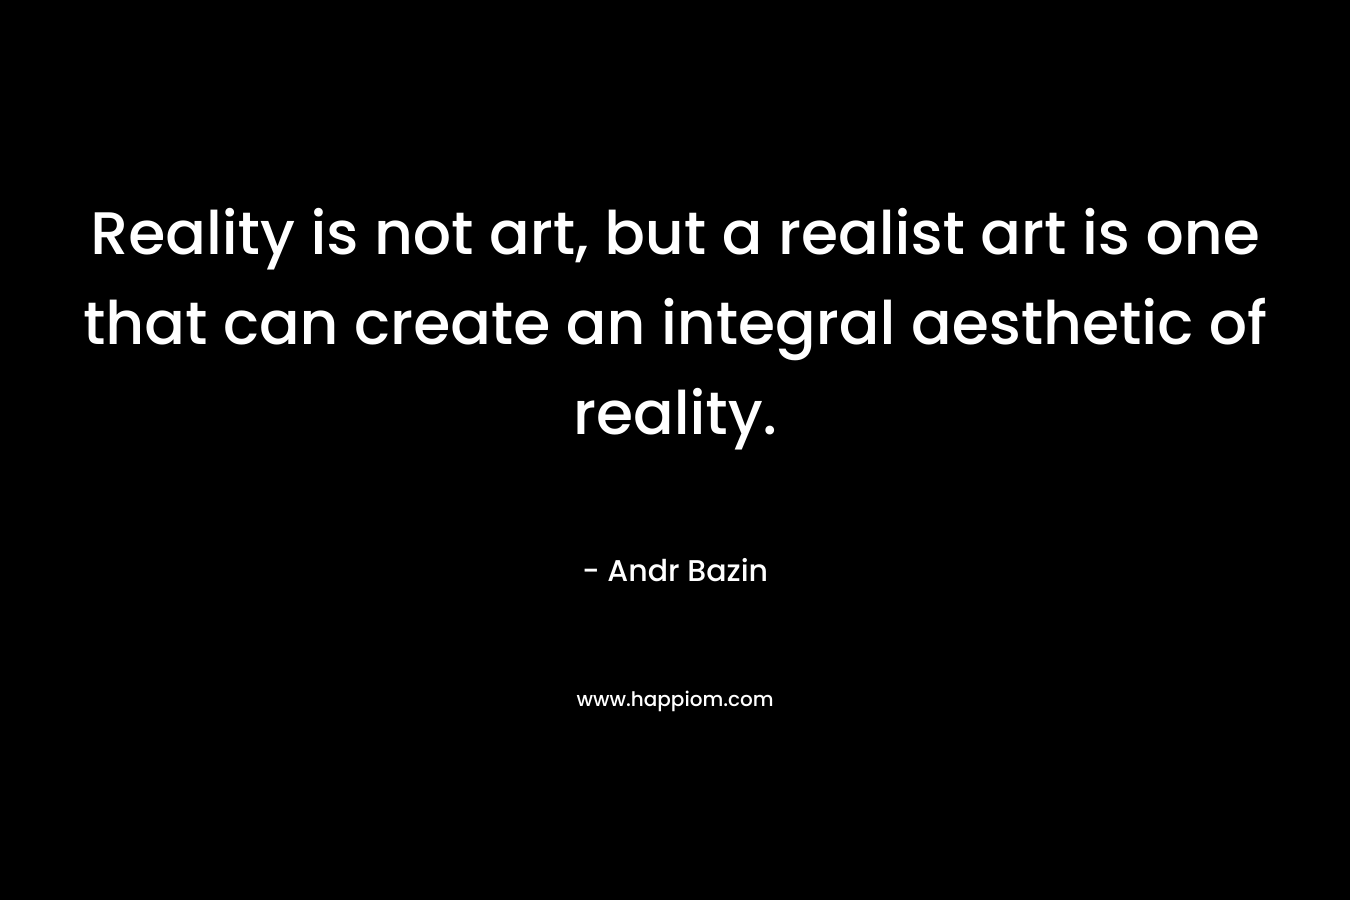 Reality is not art, but a realist art is one that can create an integral aesthetic of reality. – Andr Bazin